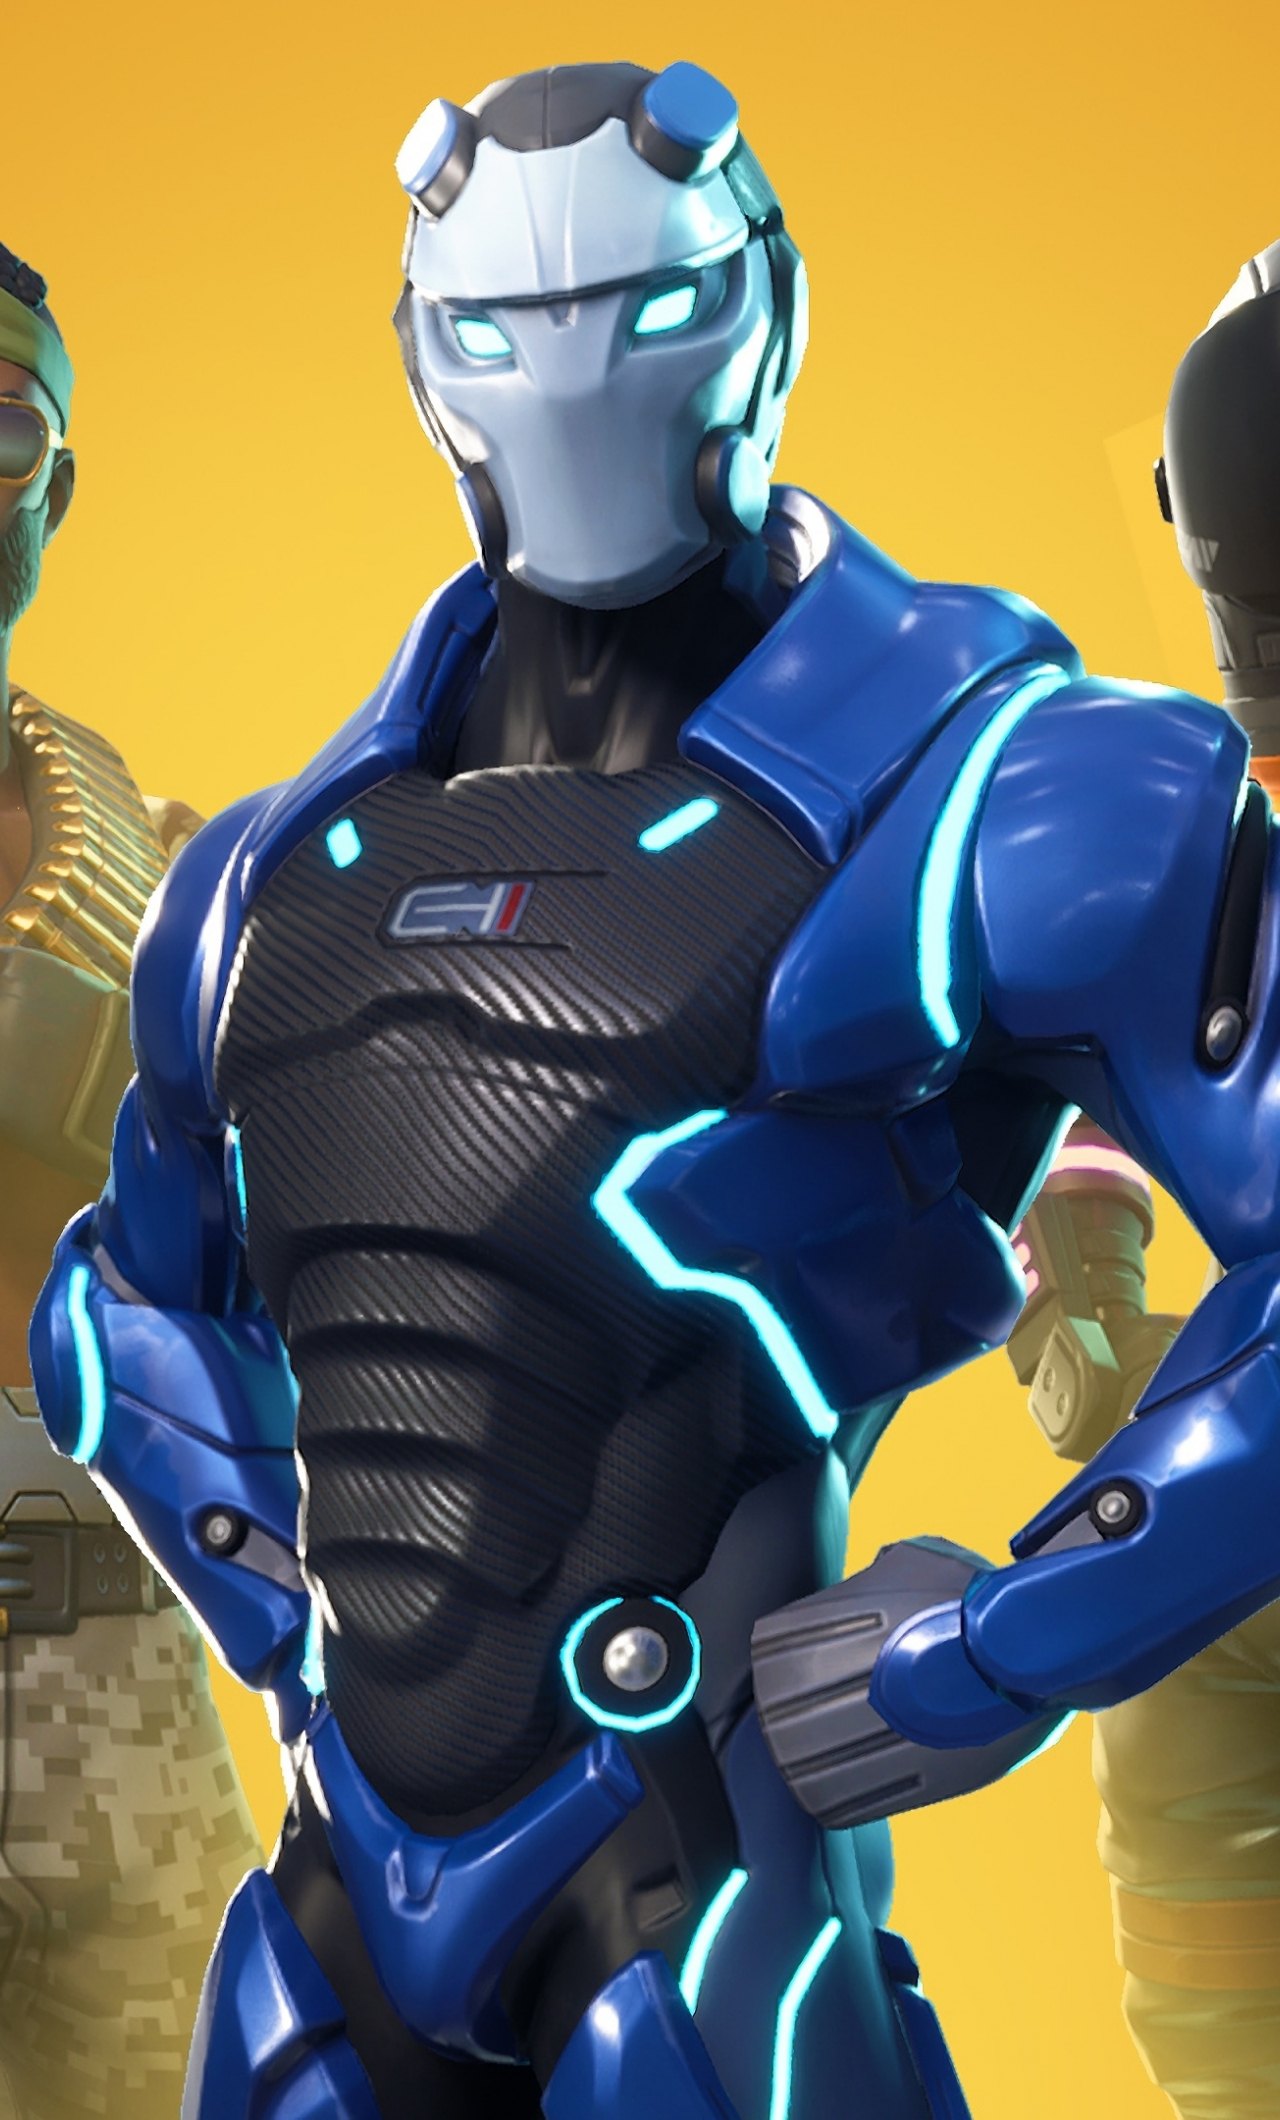 fortnite famous online video game skin characters 1280x2120 wallpaper - fortnite iphone 6 download